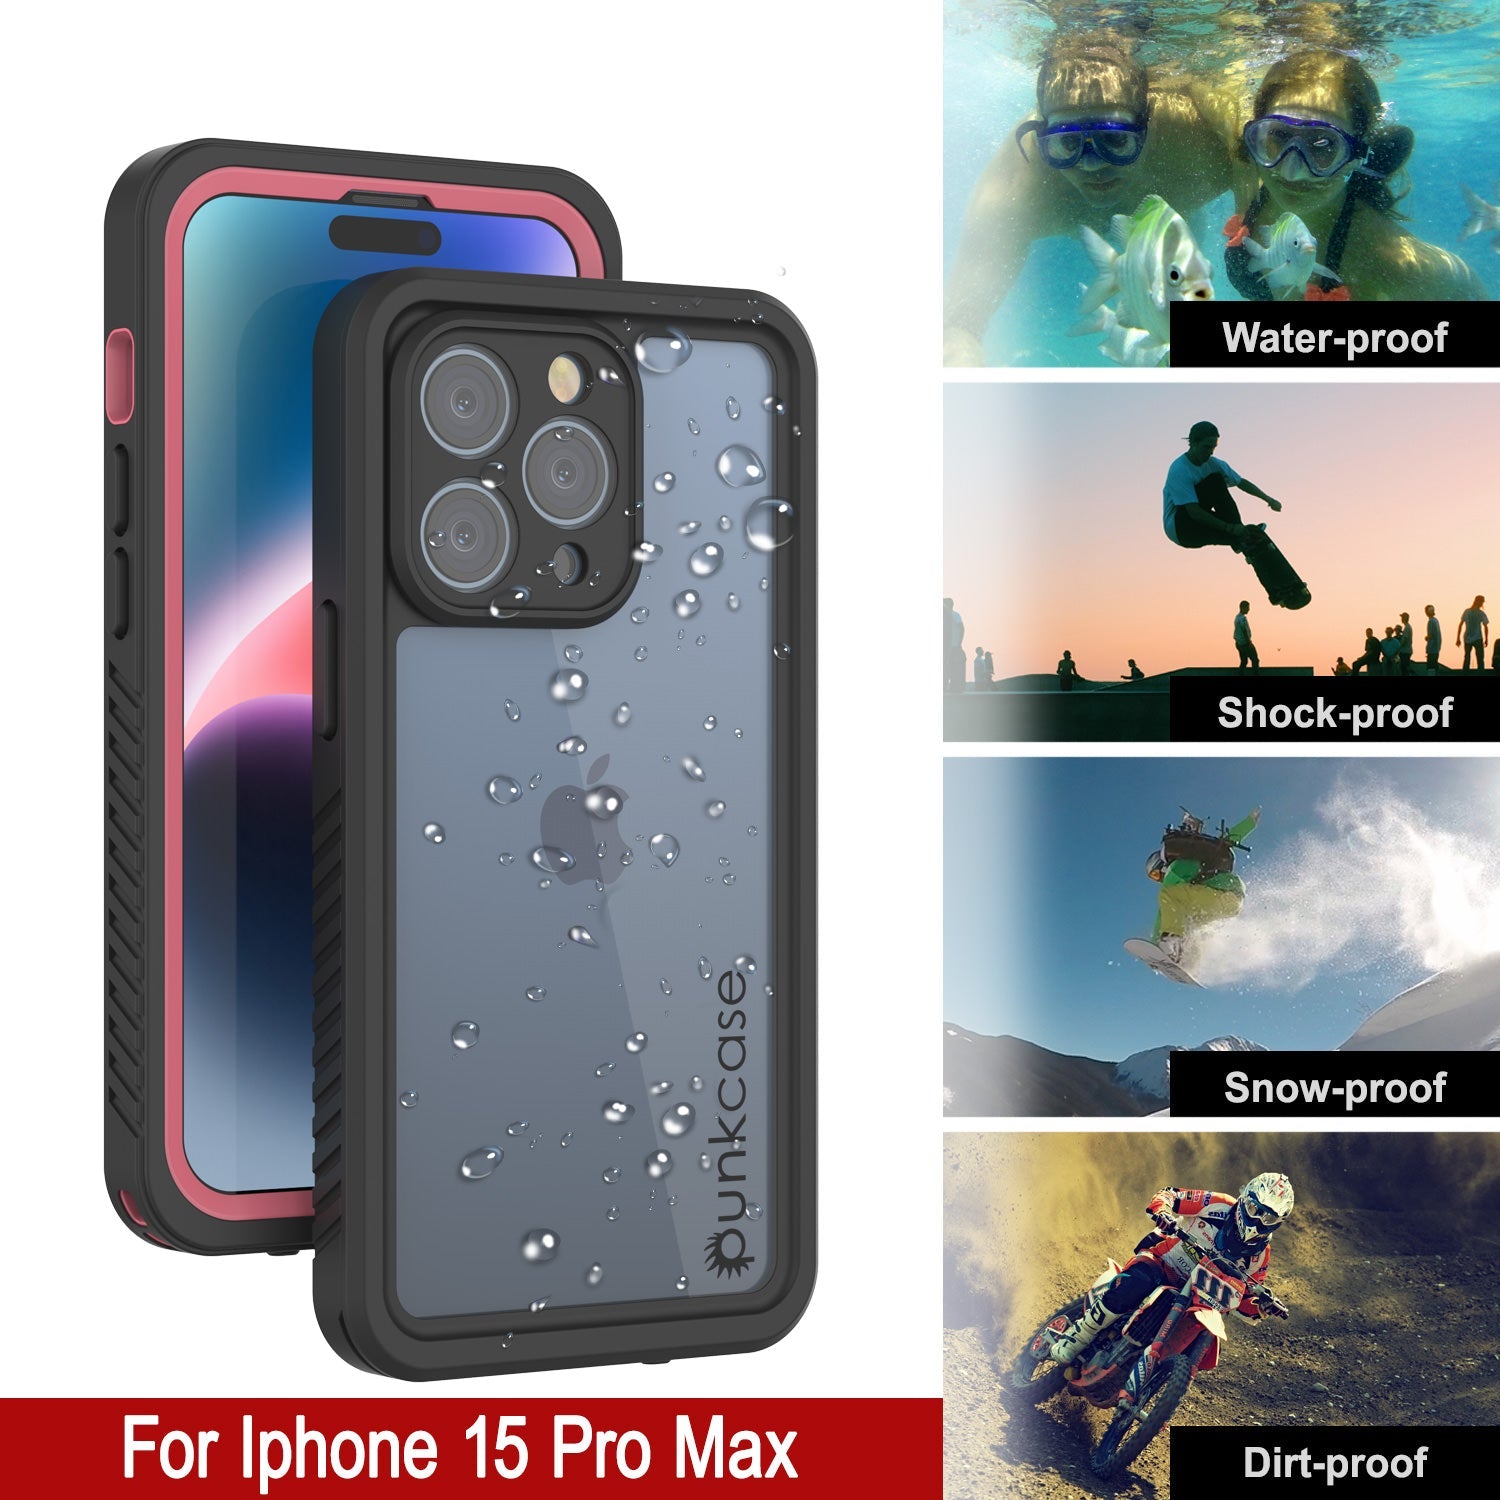 iPhone 15 Pro Max Waterproof Case, Punkcase [Extreme Series] Armor Cover W/ Built In Screen Protector [Pink]